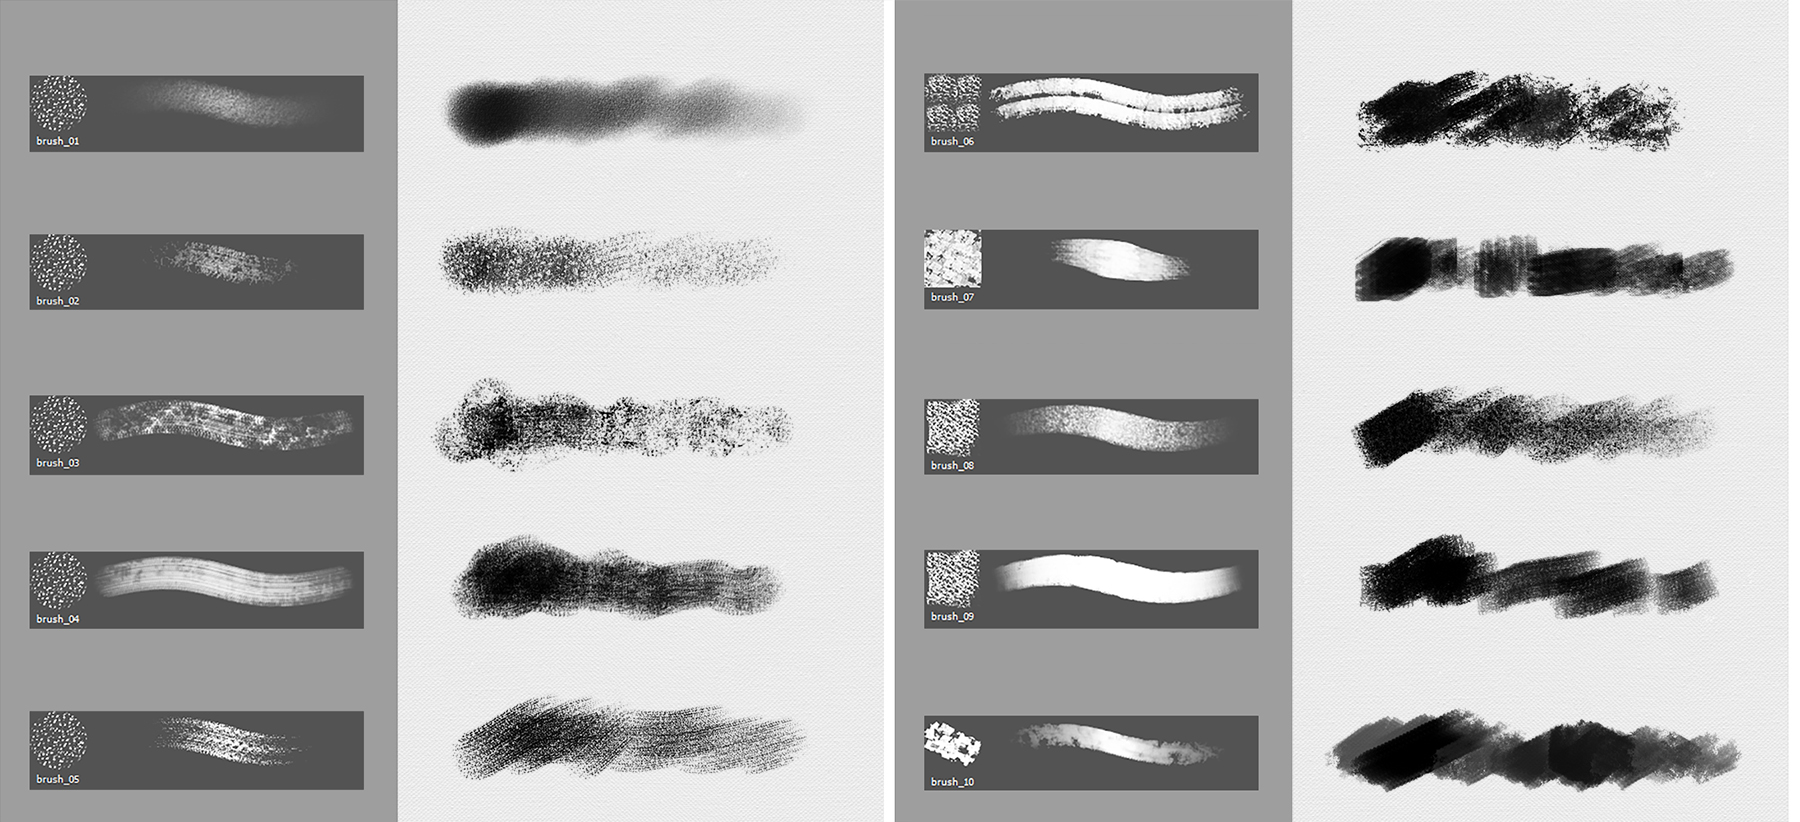 Basic Painting Brushes  Photoshop by Pearlpencil on DeviantArt